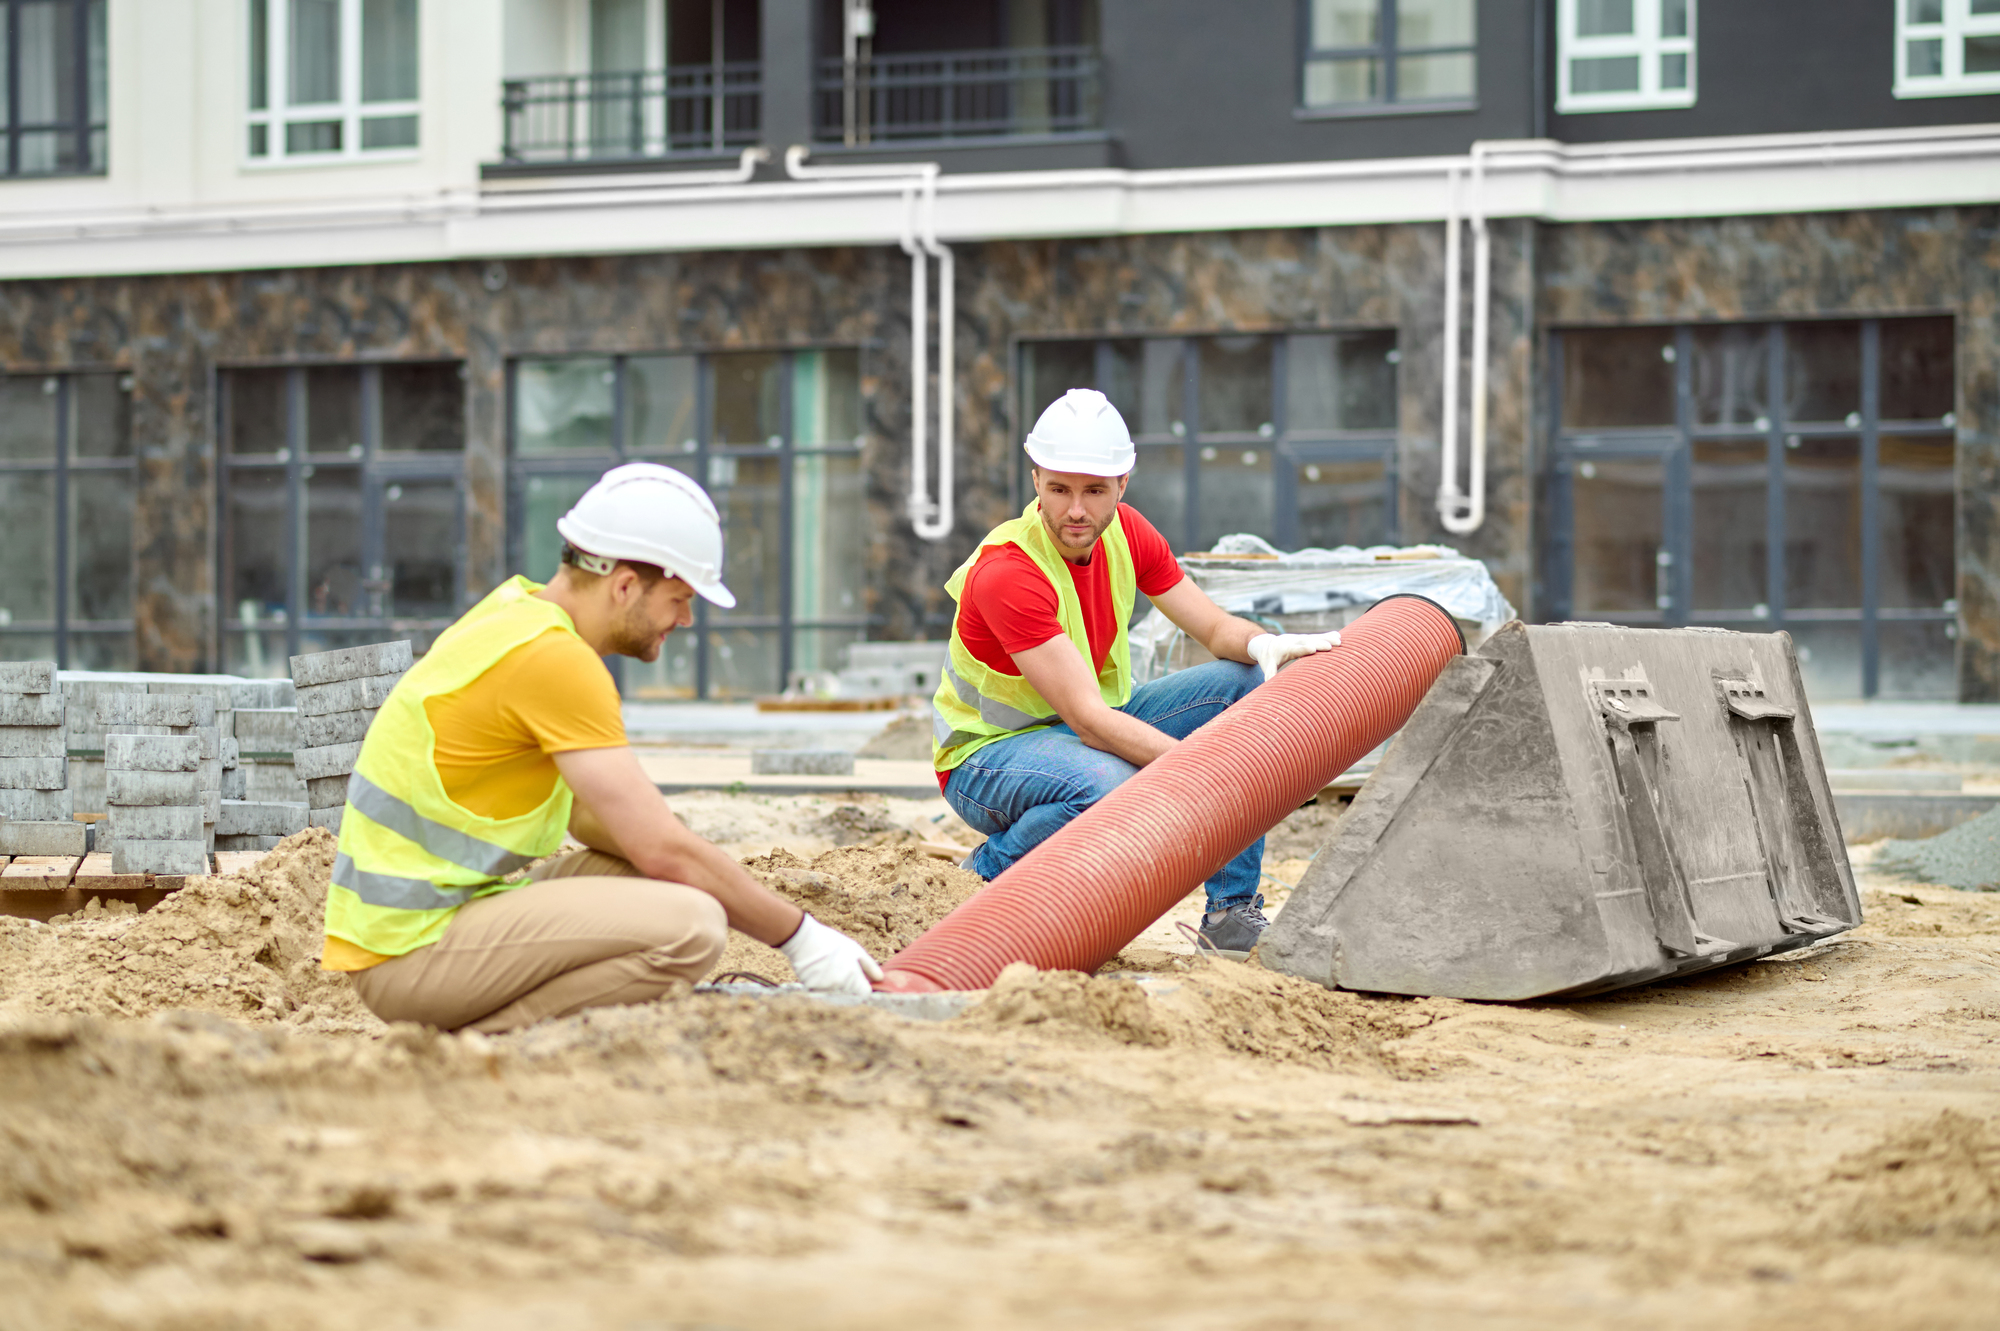 Working mood. Two men in protective helmet and bright vest crouched touching pipe on sand at construction site during day